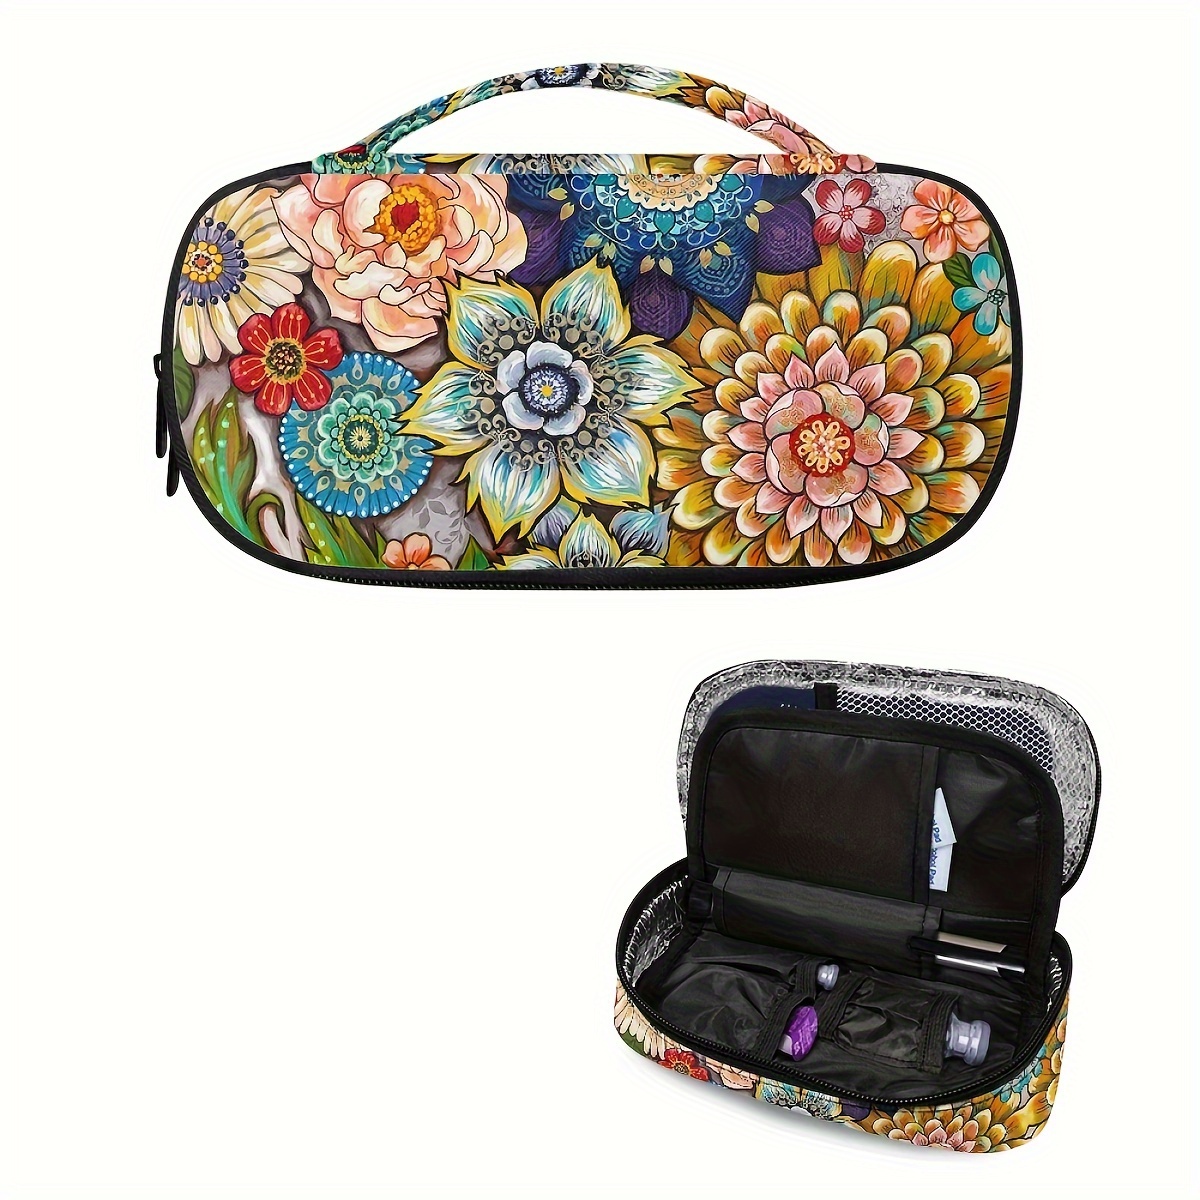 

1pc Boho Floral Insulin Cooler Travel Bag Large Capacity Diabetic Supplies Organizer For Insulin Pens And Other Diabetic Supplies